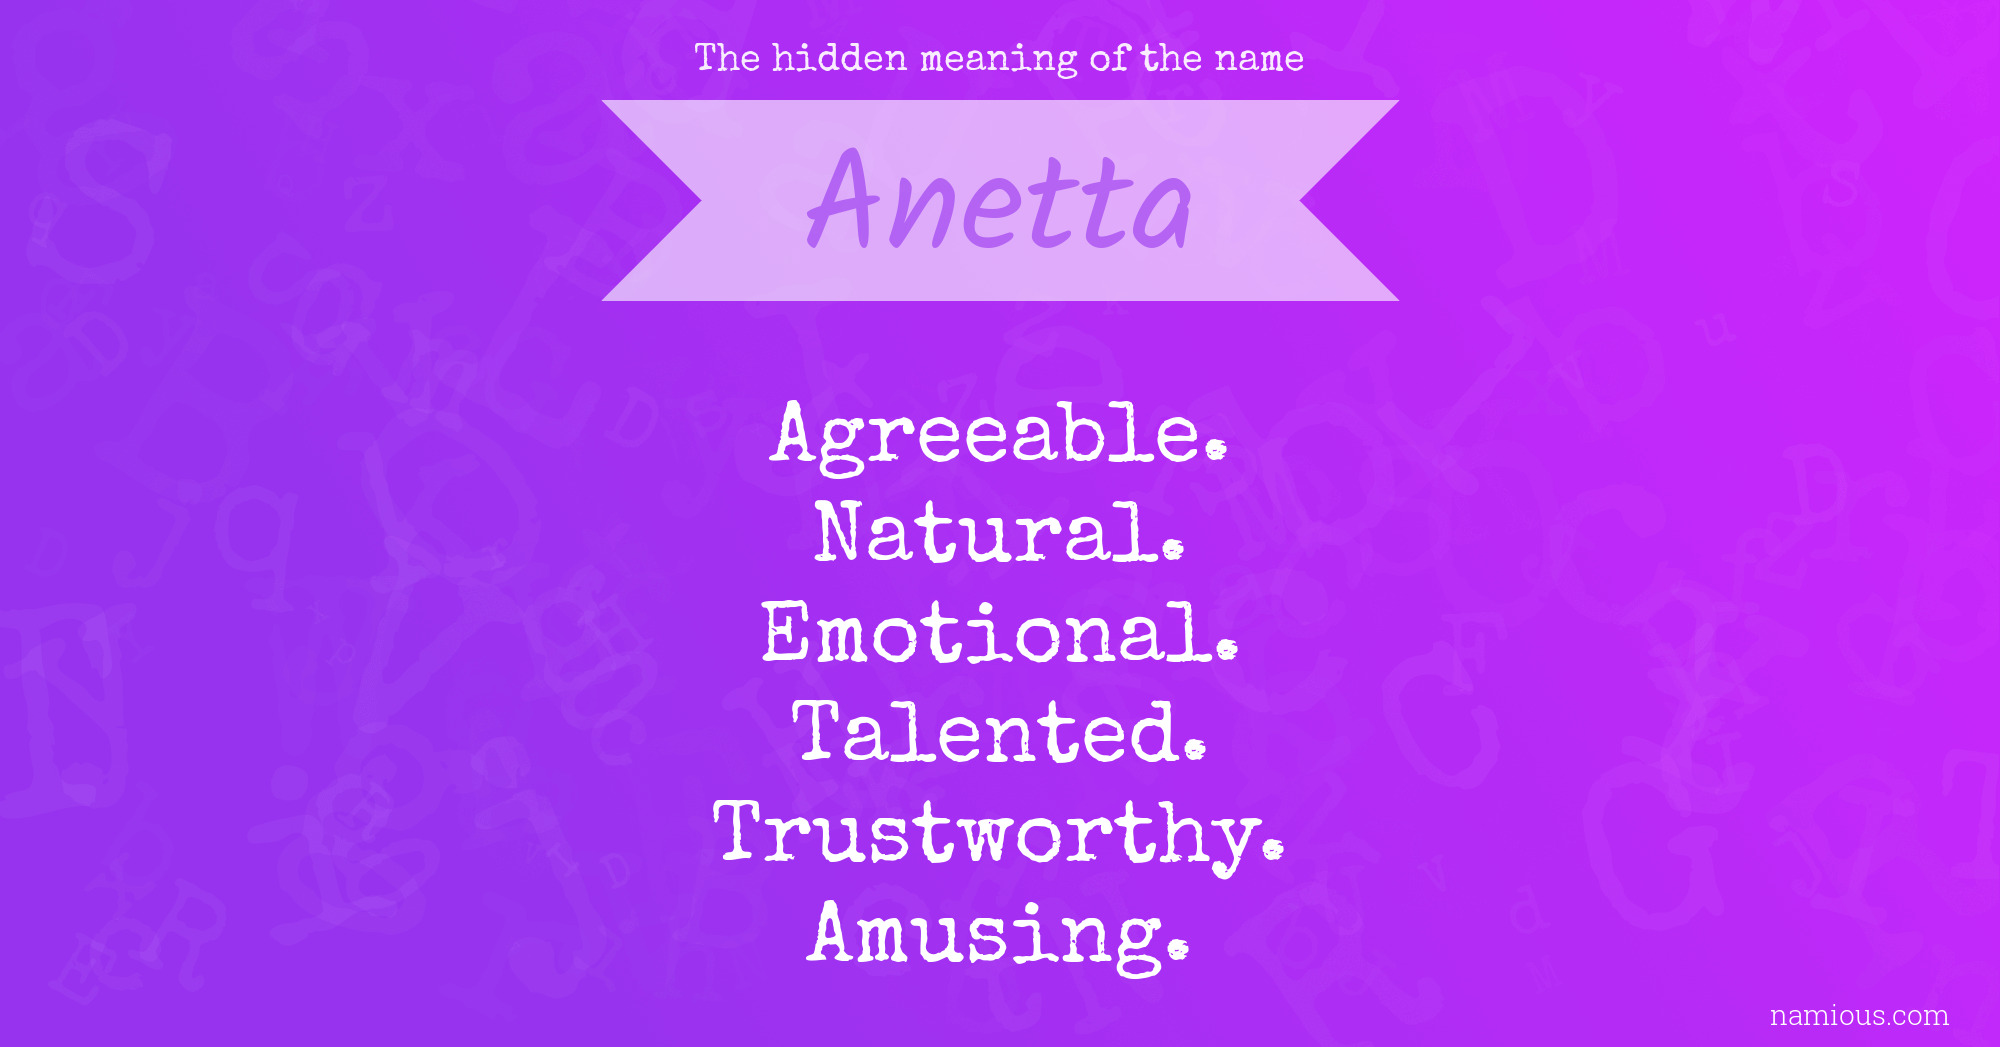 The hidden meaning of the name Anetta